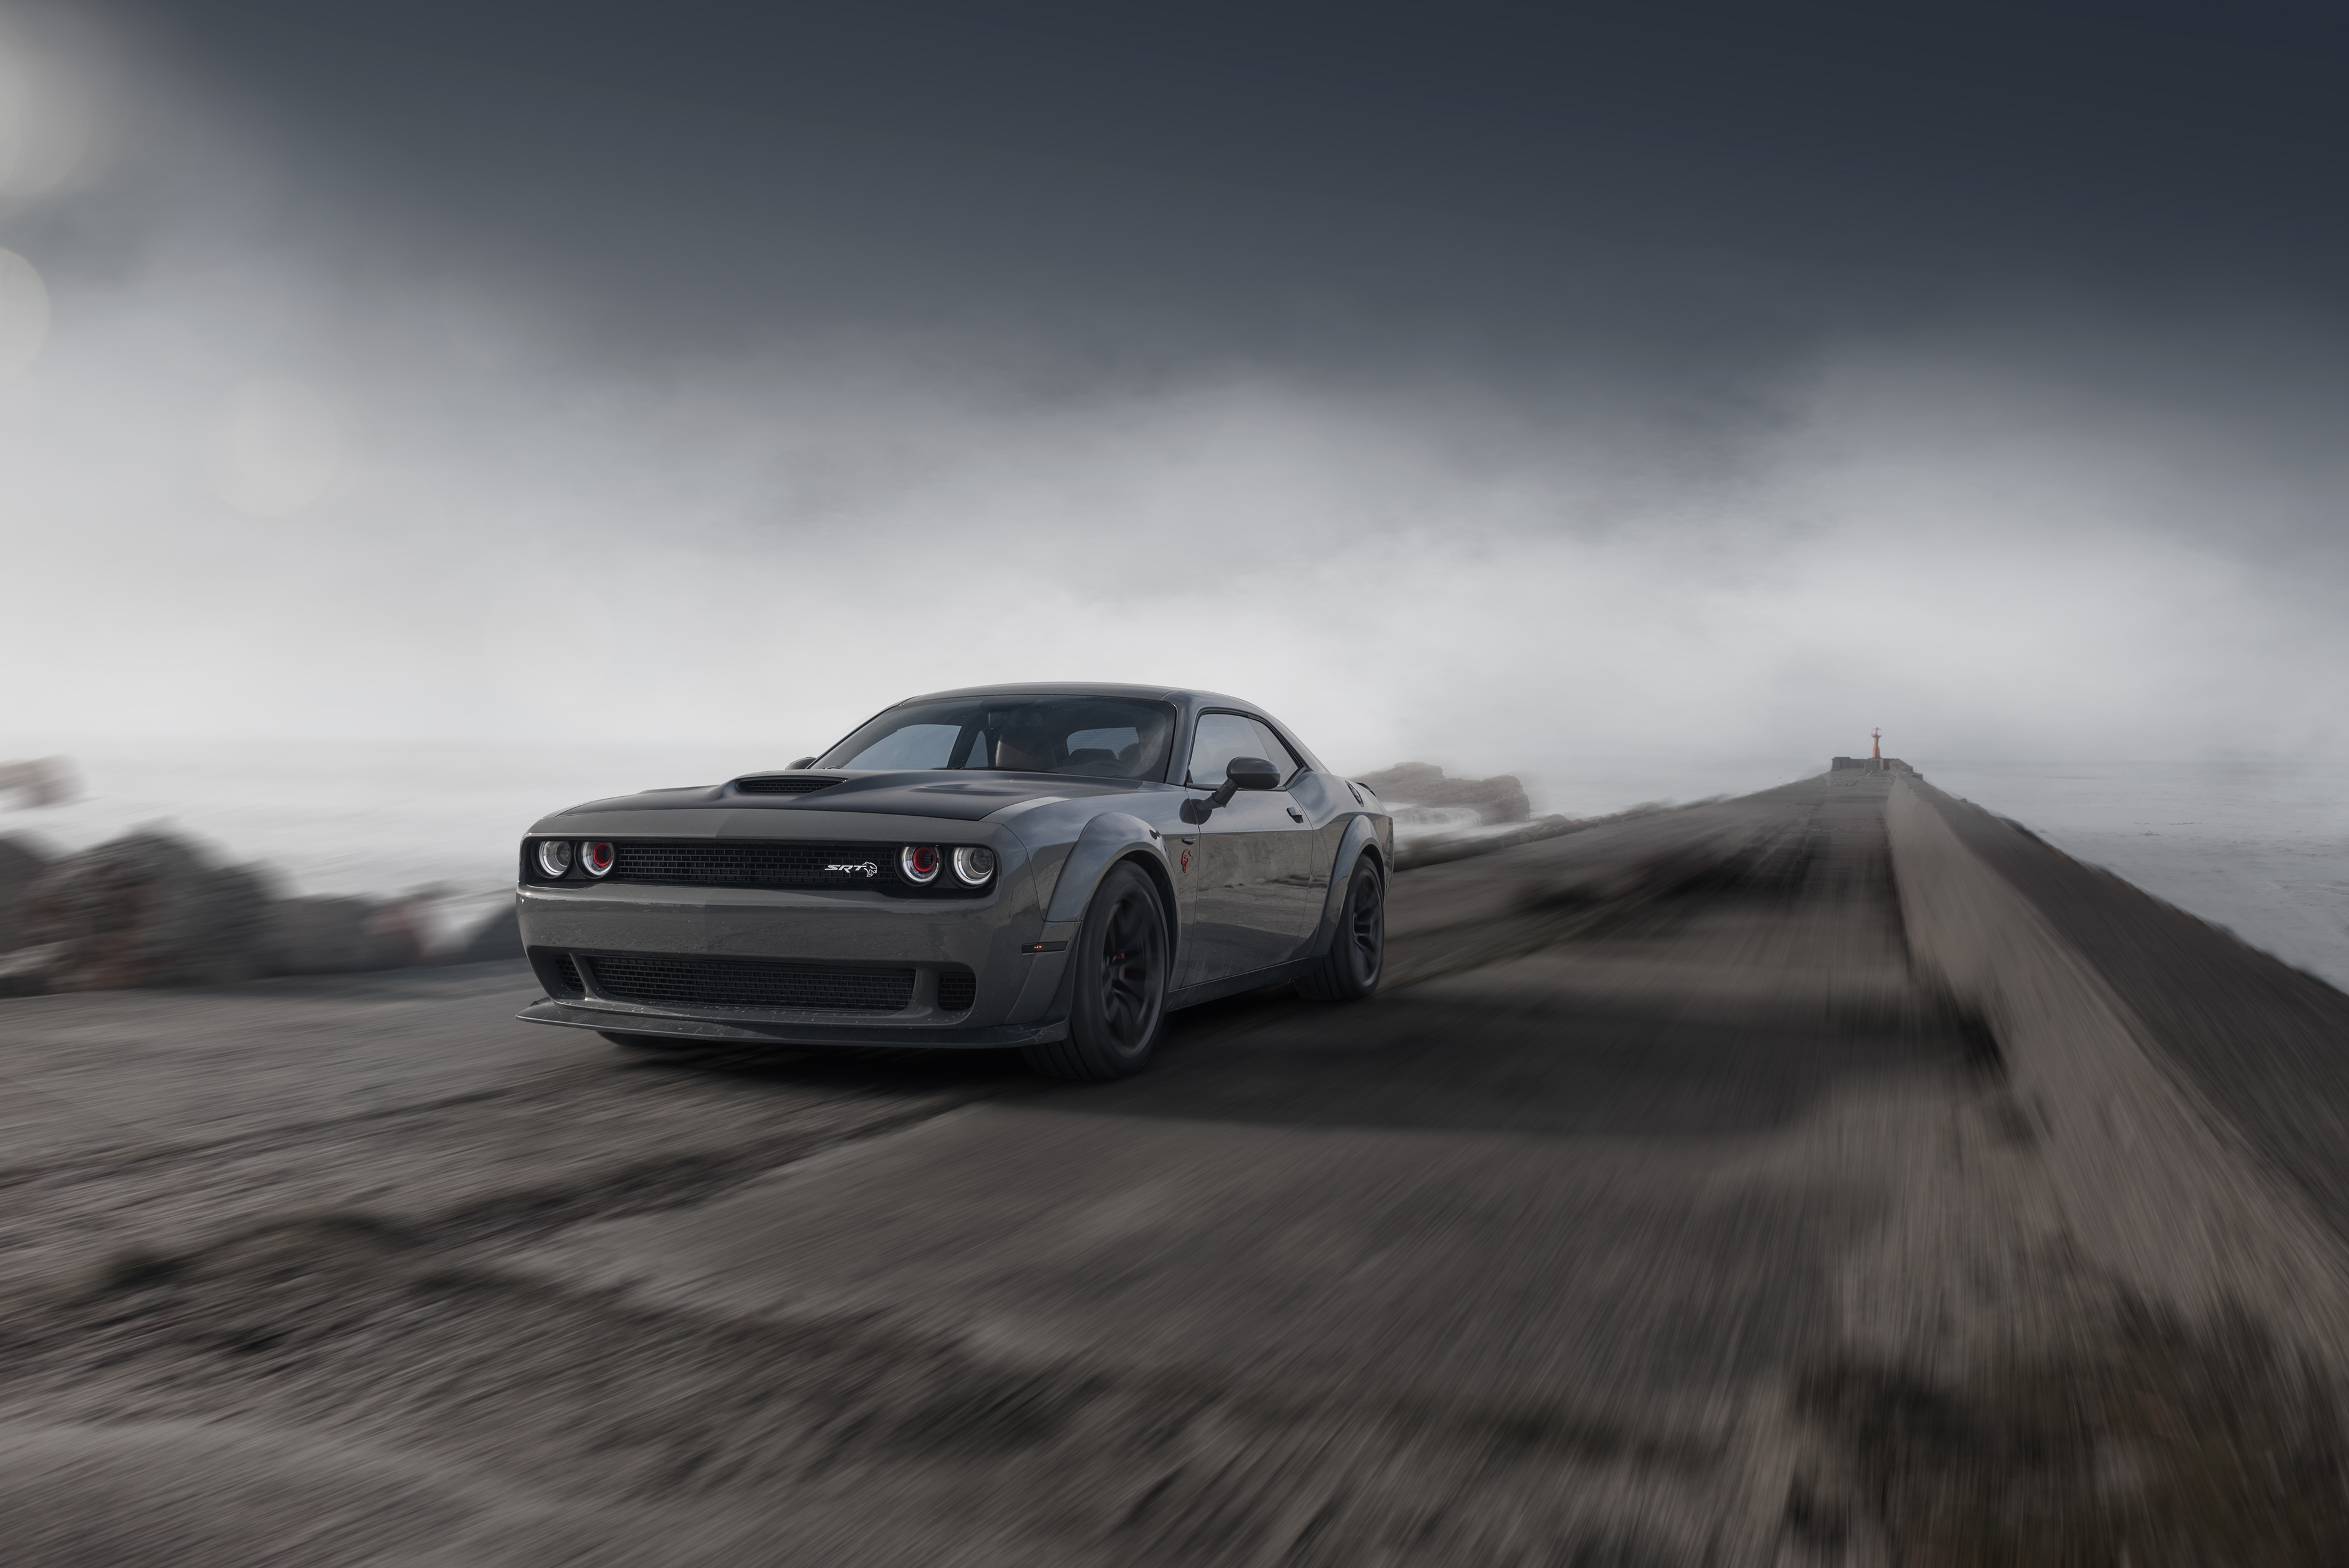 Wallpapers in move Dodge Challenger front of on the desktop